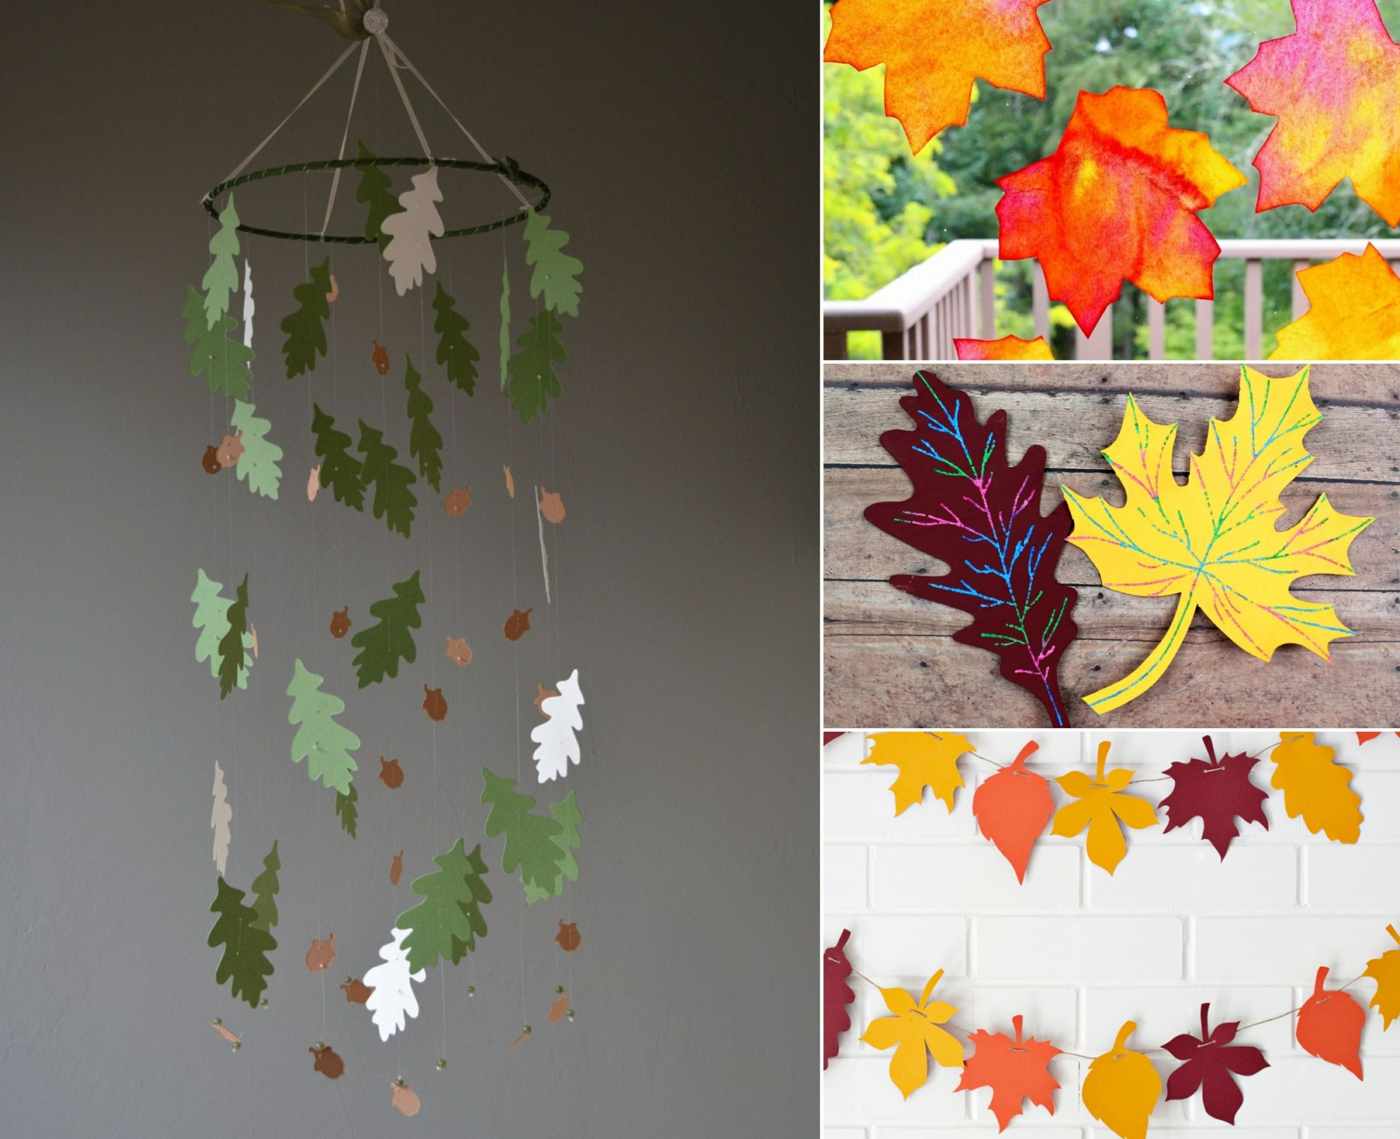 Craft ideas for autumn with leaves to garland from garlands, mobiles and more